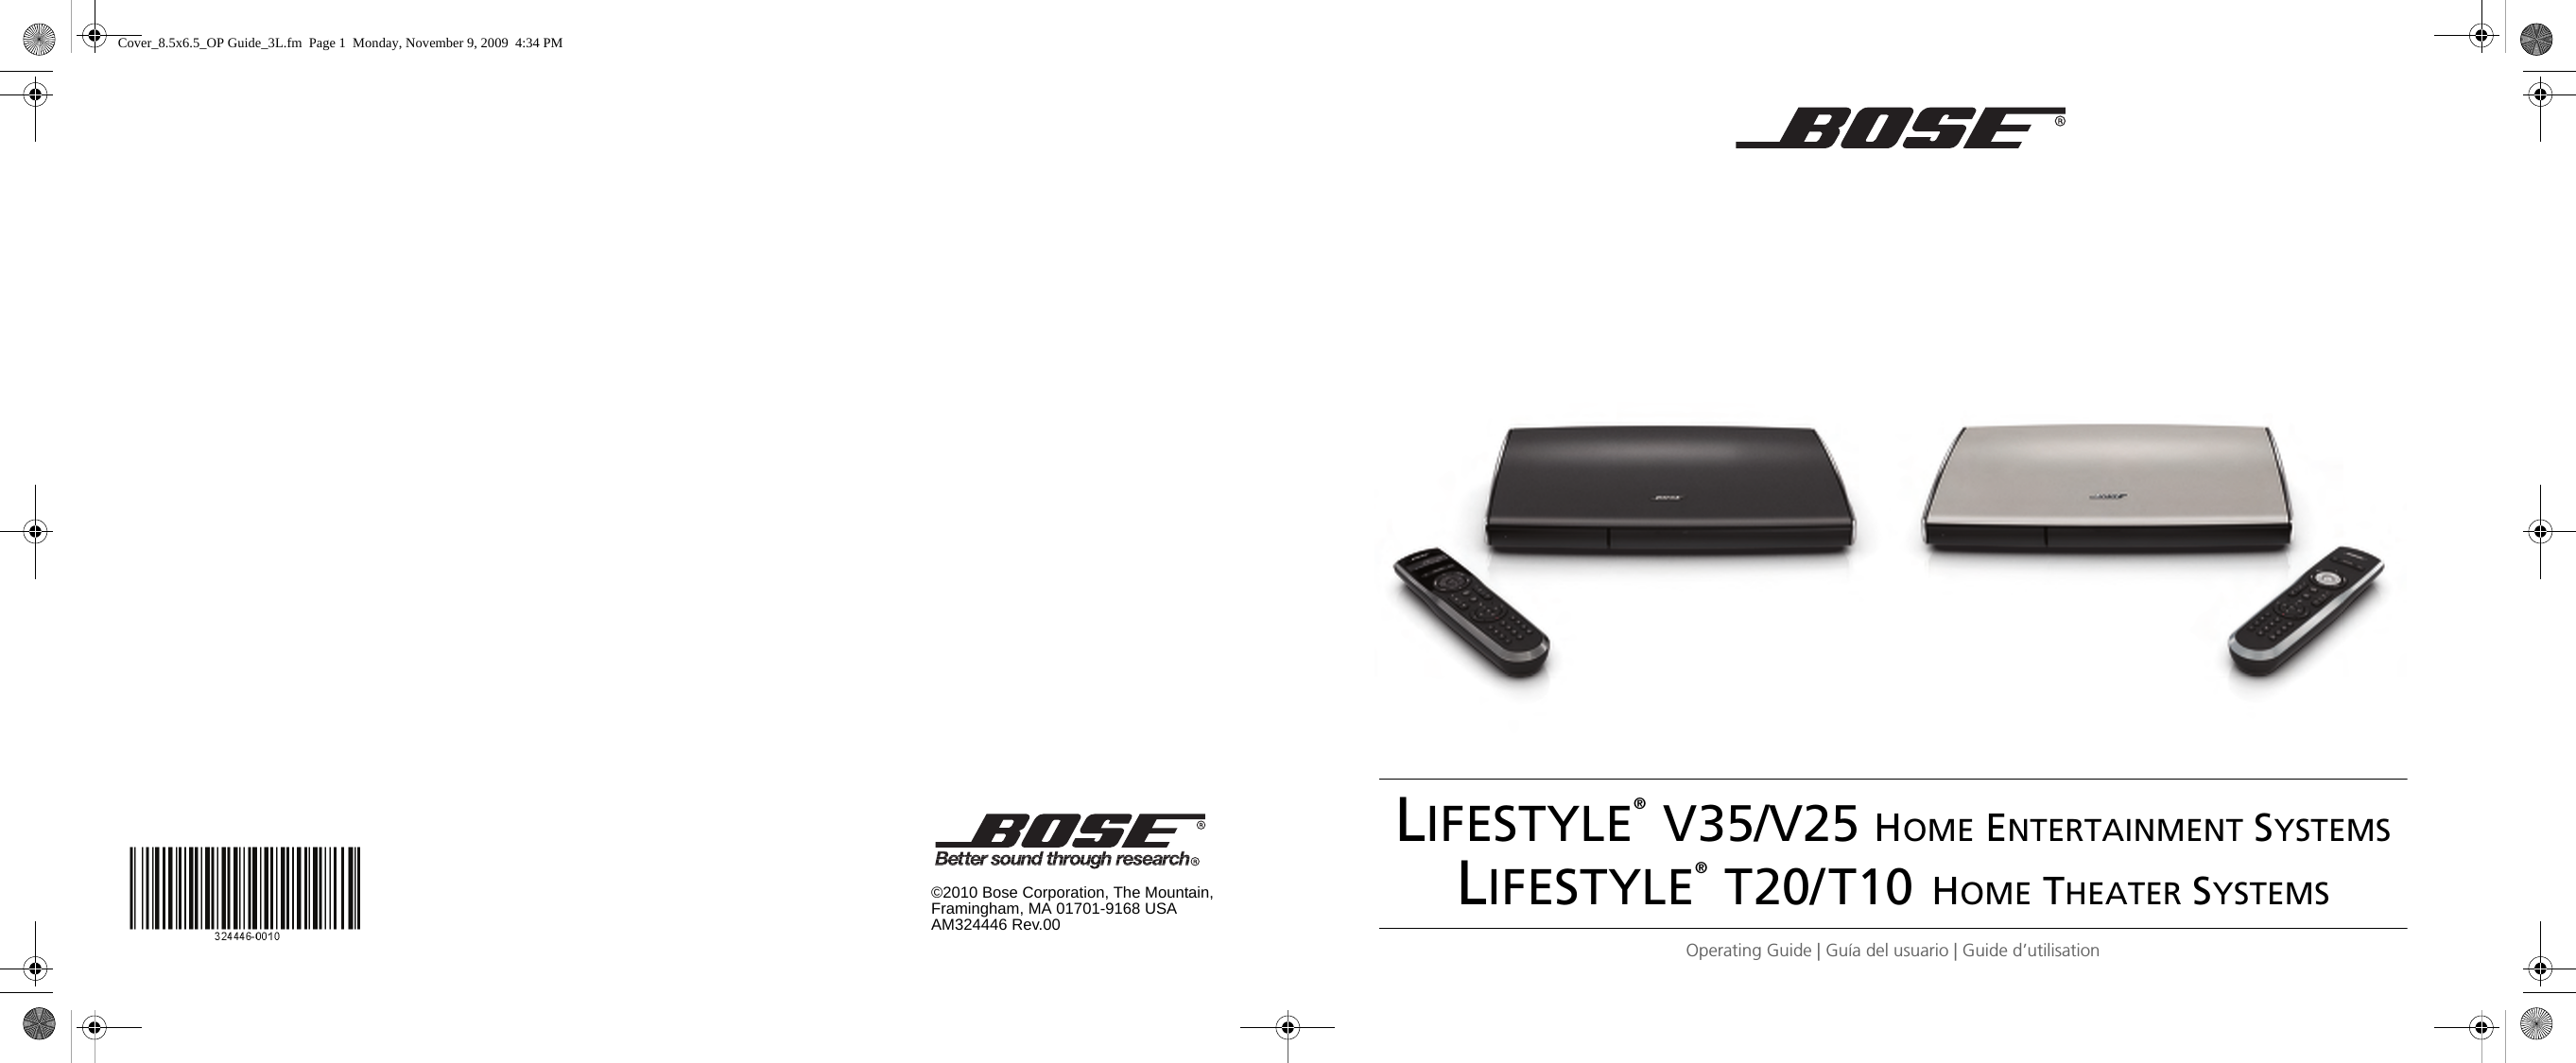 ©2010 Bose Corporation, The Mountain,Framingham, MA 01701-9168 USAAM324446 Rev.00LIFESTYLE® V35/V25 HOME ENTERTAINMENT SYSTEMSLIFESTYLE® T20/ T10 HOME THEATER SYSTEMSOperating Guide | Guía del usuario | Guide d’utilisationCover_8.5x6.5_OP Guide_3L.fm  Page 1  Monday, November 9, 2009  4:34 PM